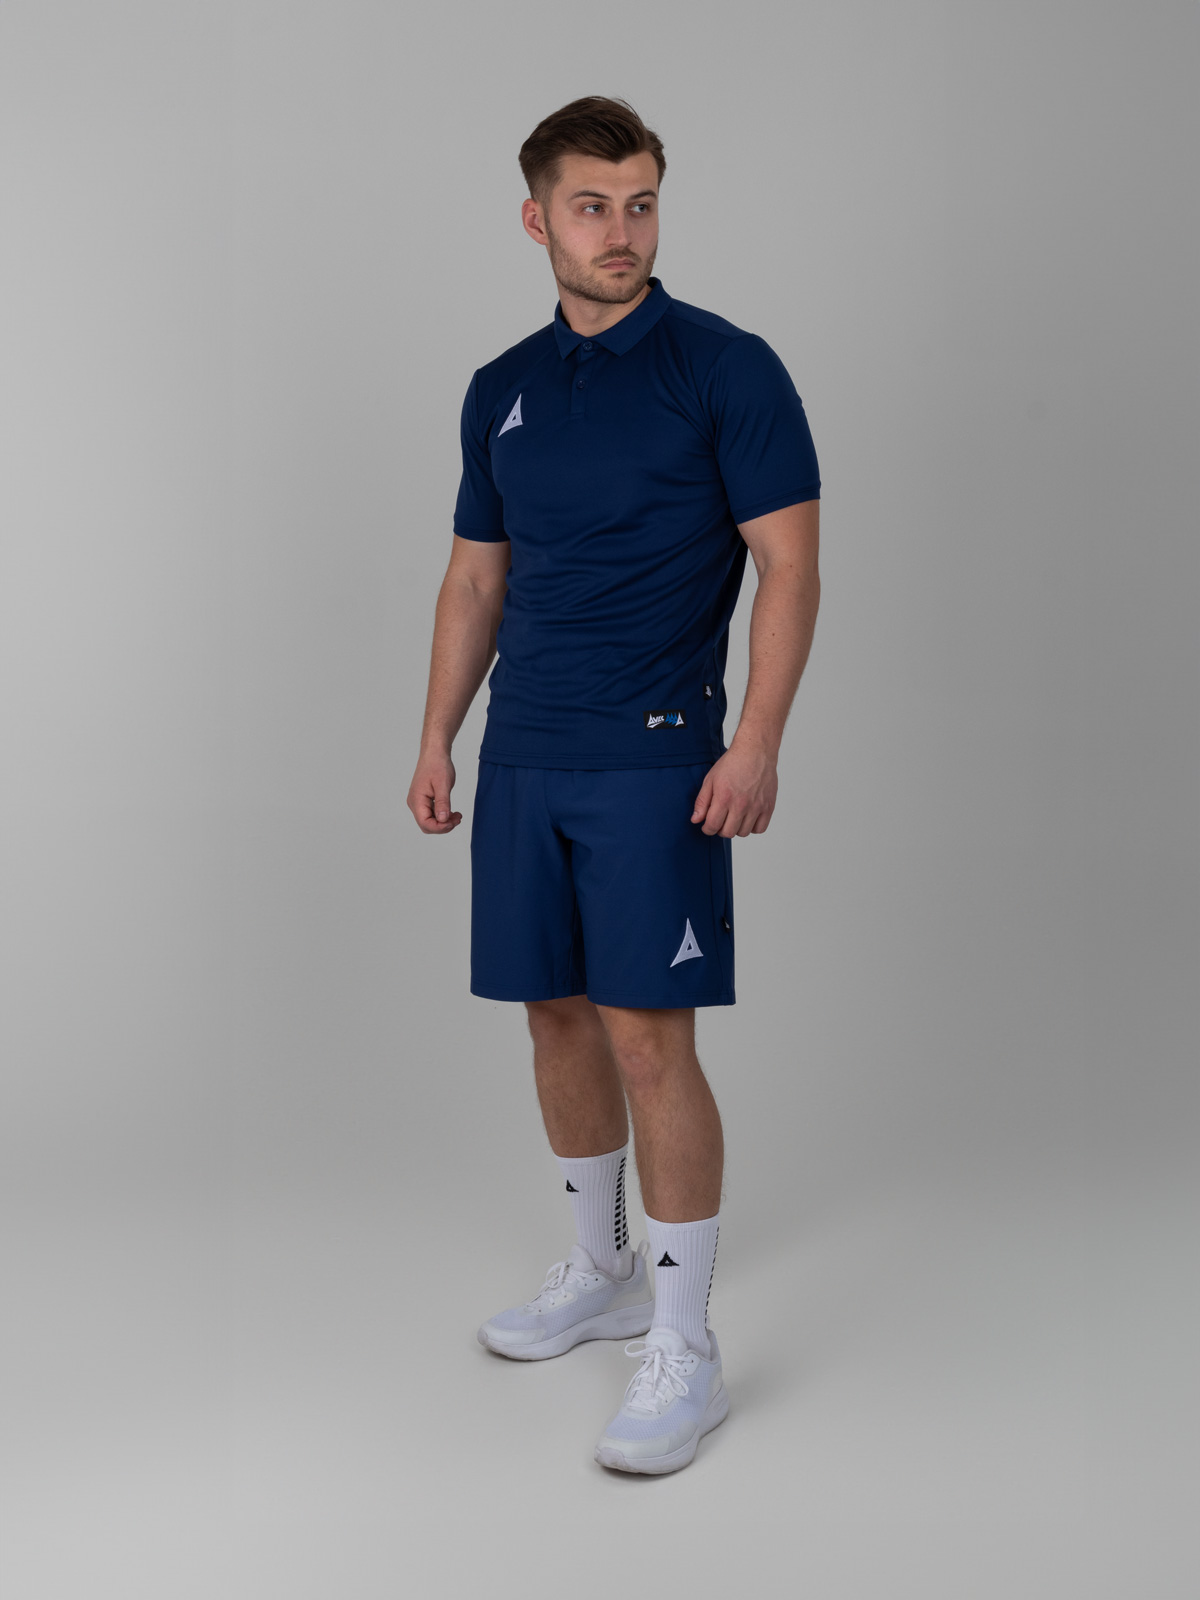 an all blue outfit with a navy blue longer short is worn with a navy polo for a classic sports look